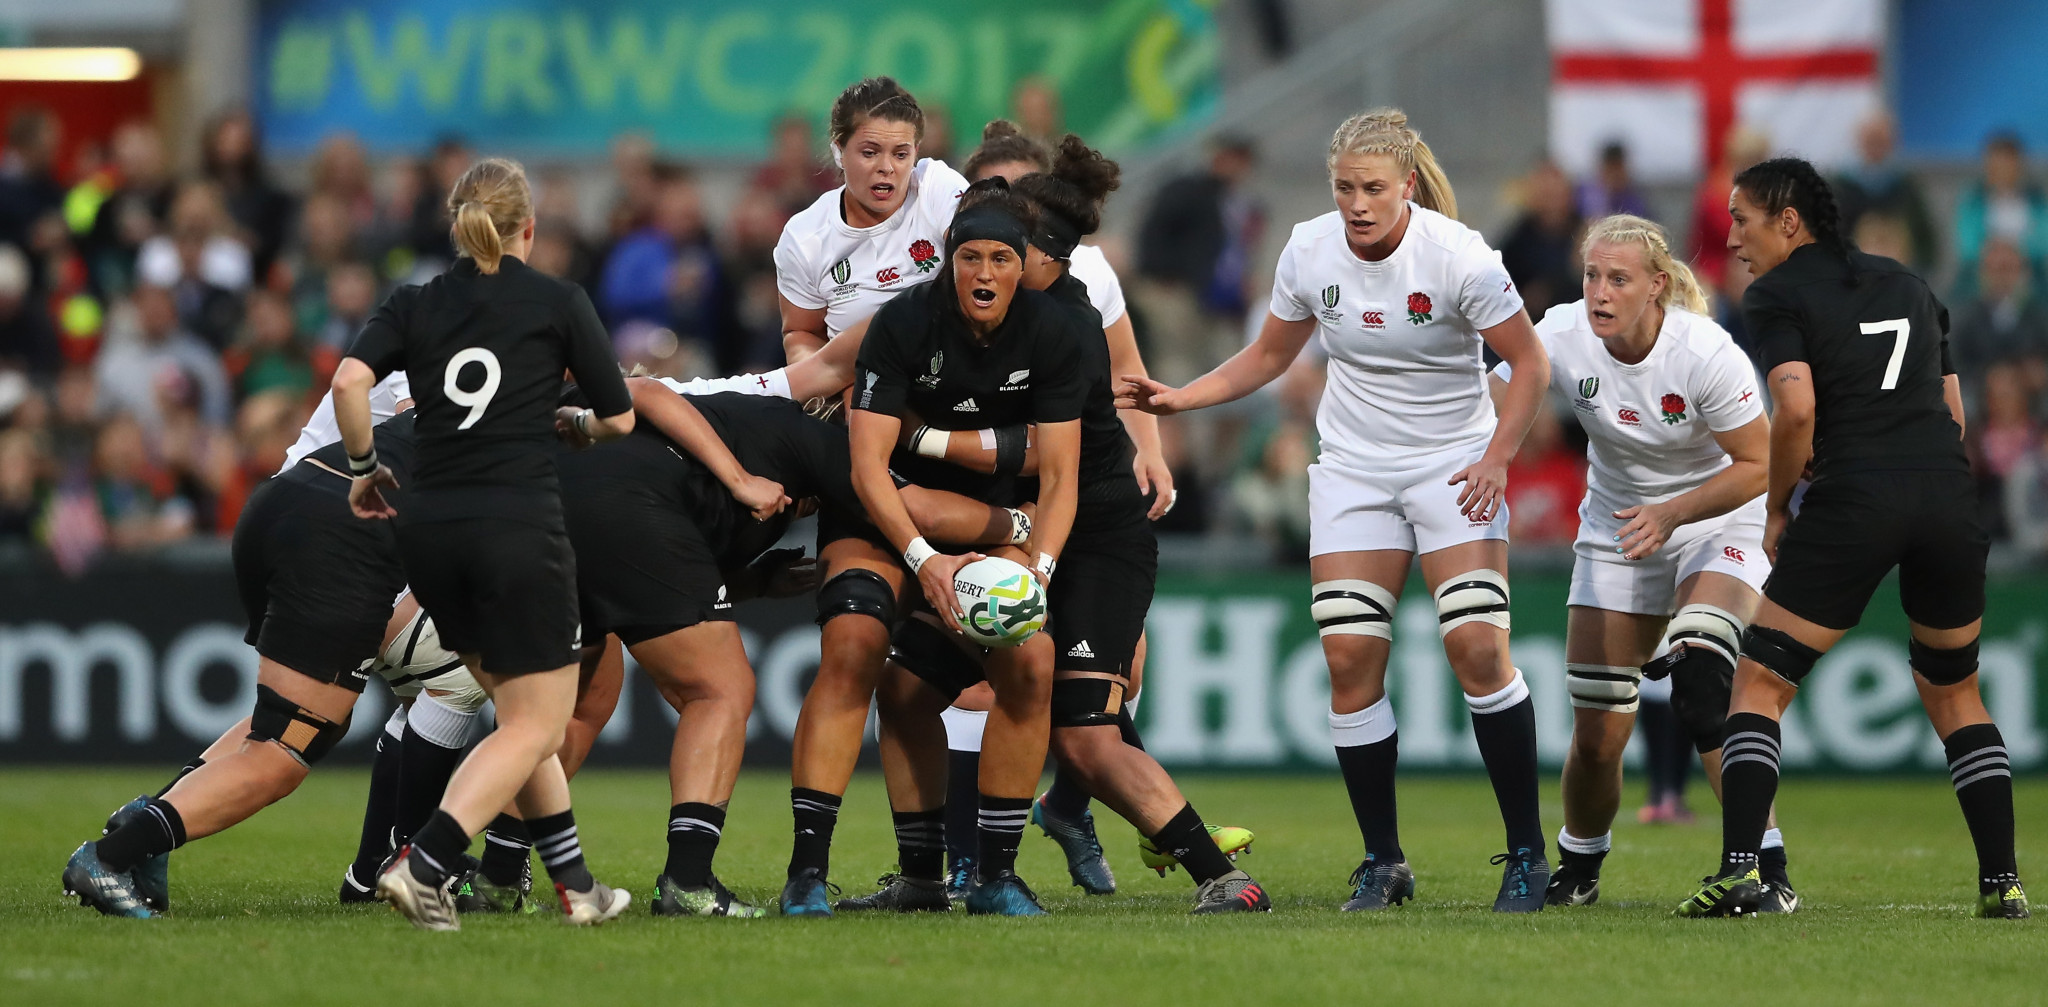 The word "Women's" has been removed from the name Women's Rugby World Cup ©Getty Images